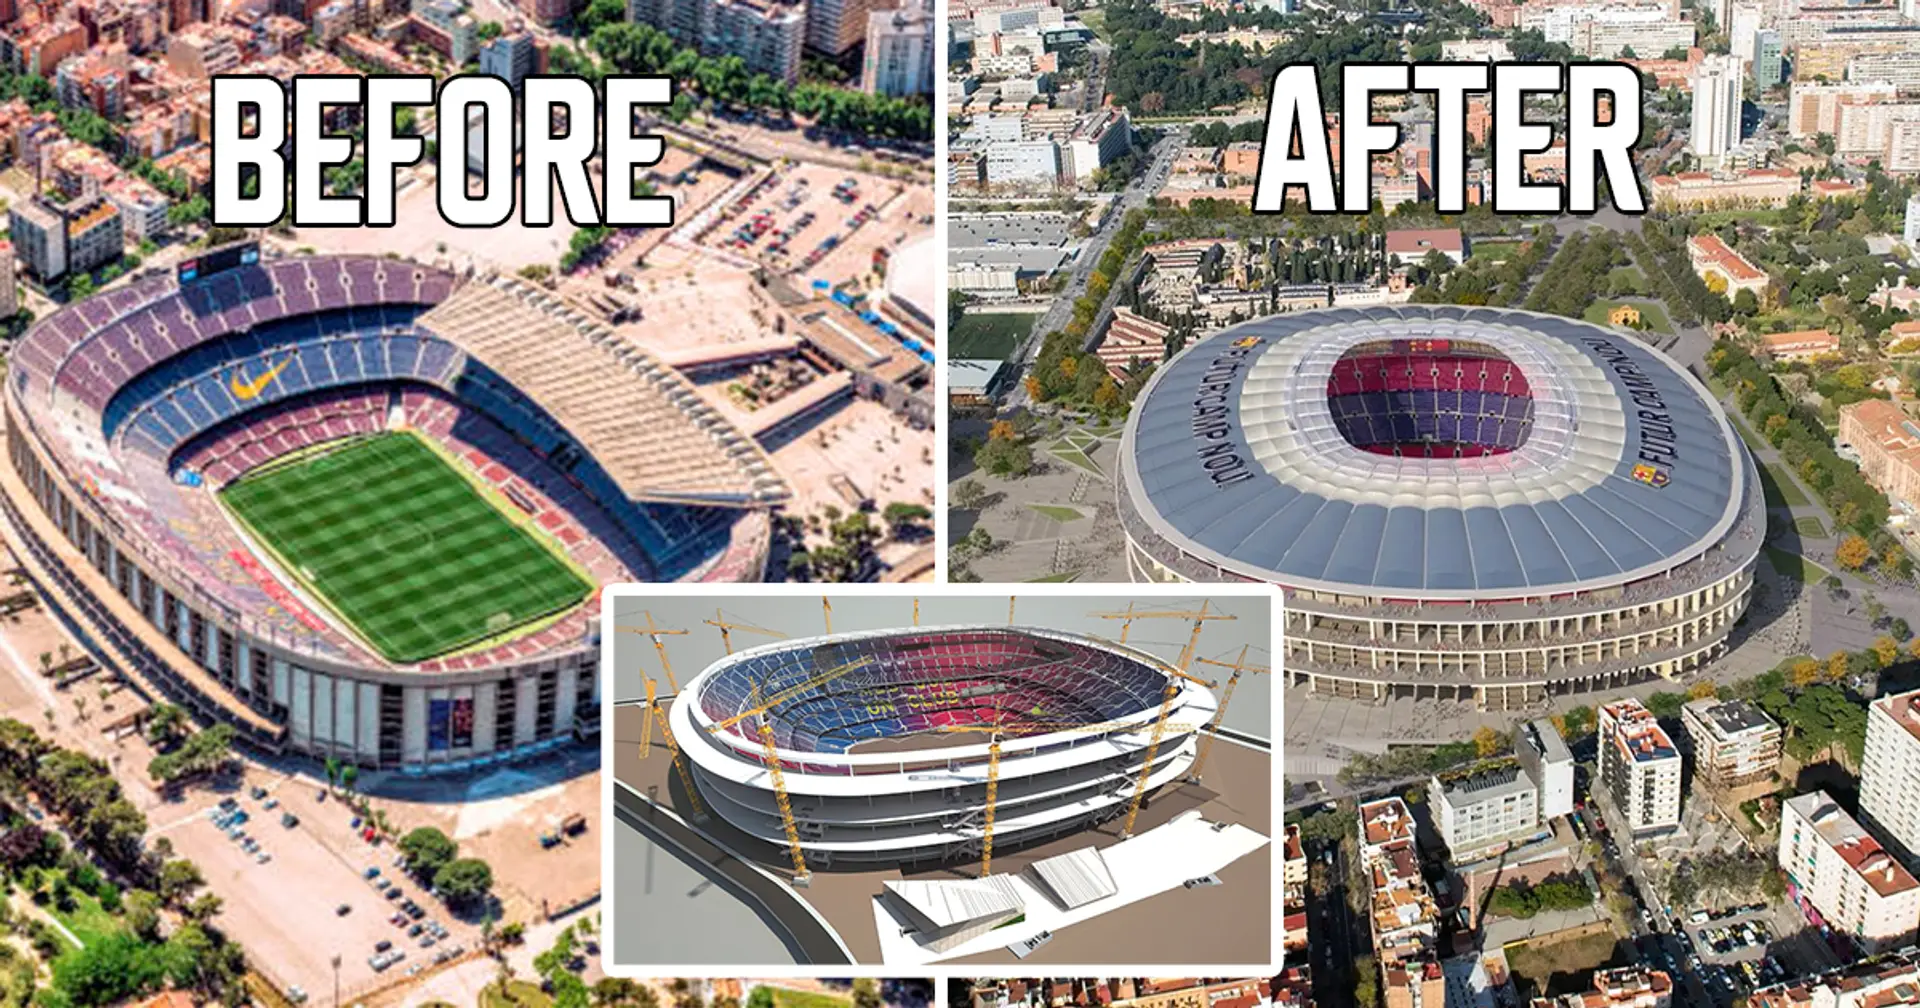 How Camp Nou will look after £1.3 billion renovation